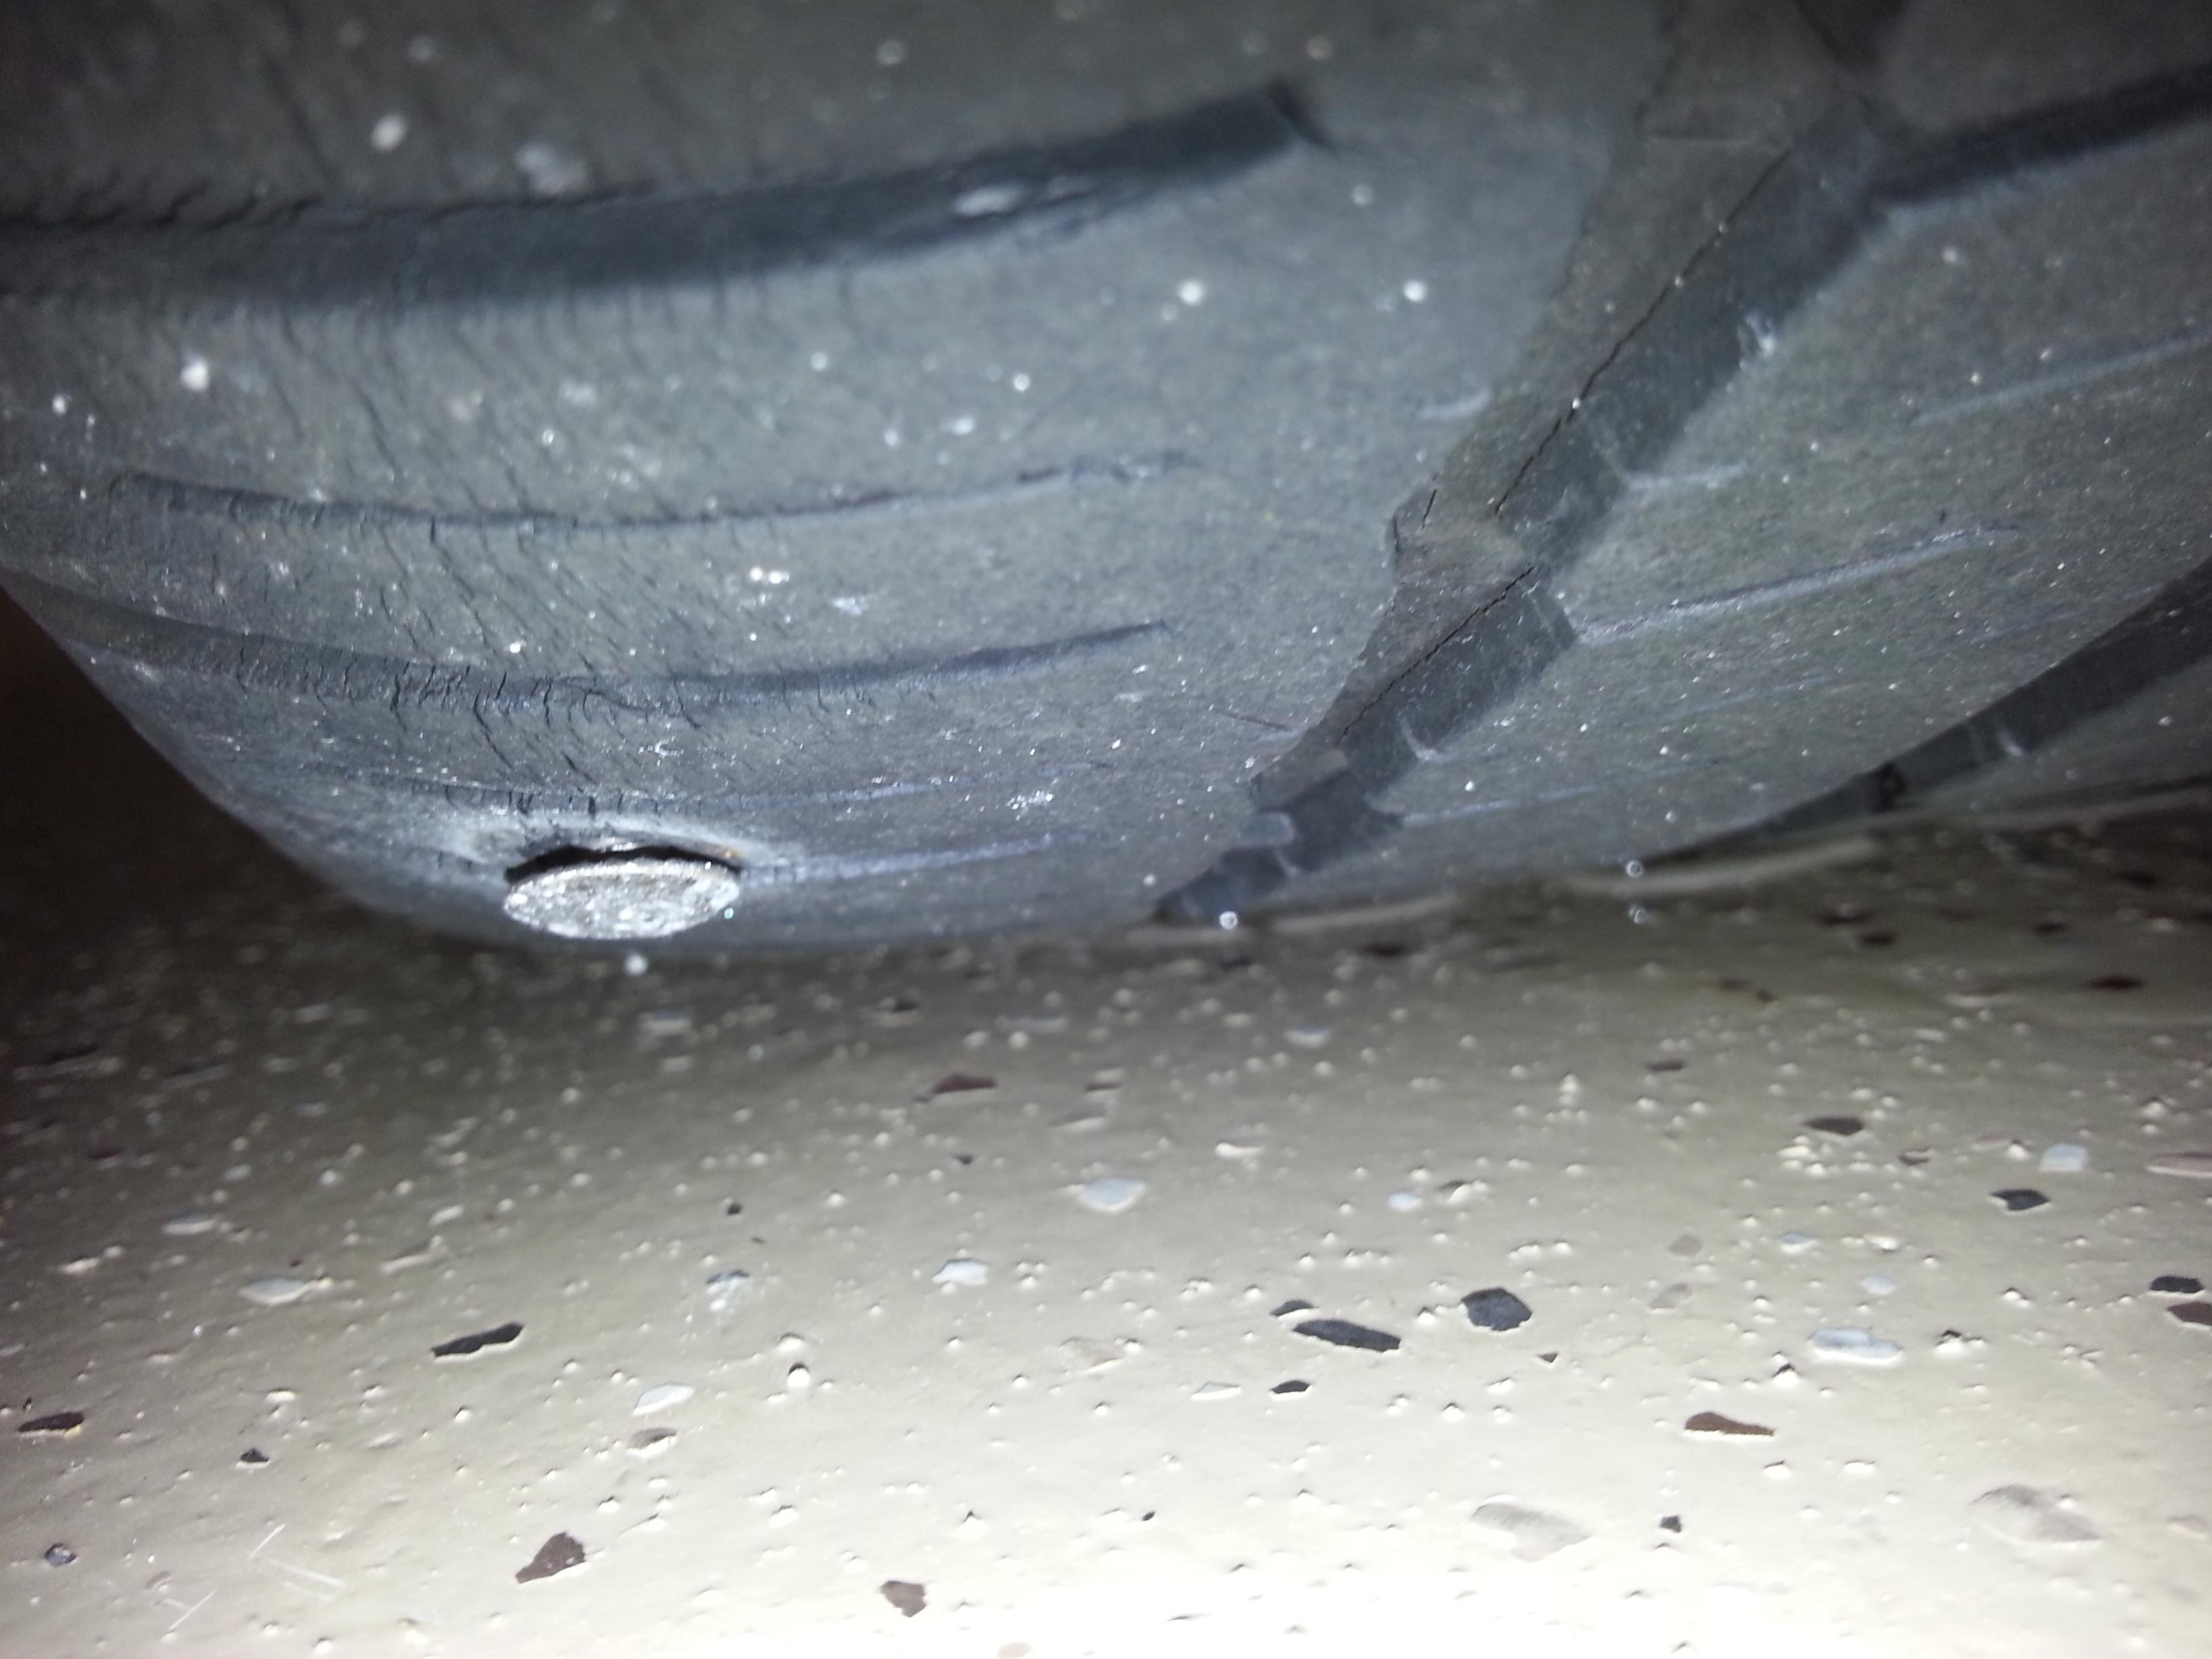 Can my tire with a nail in it be repaired? (pic) - Maintenance/Repairs -  Car Talk Community